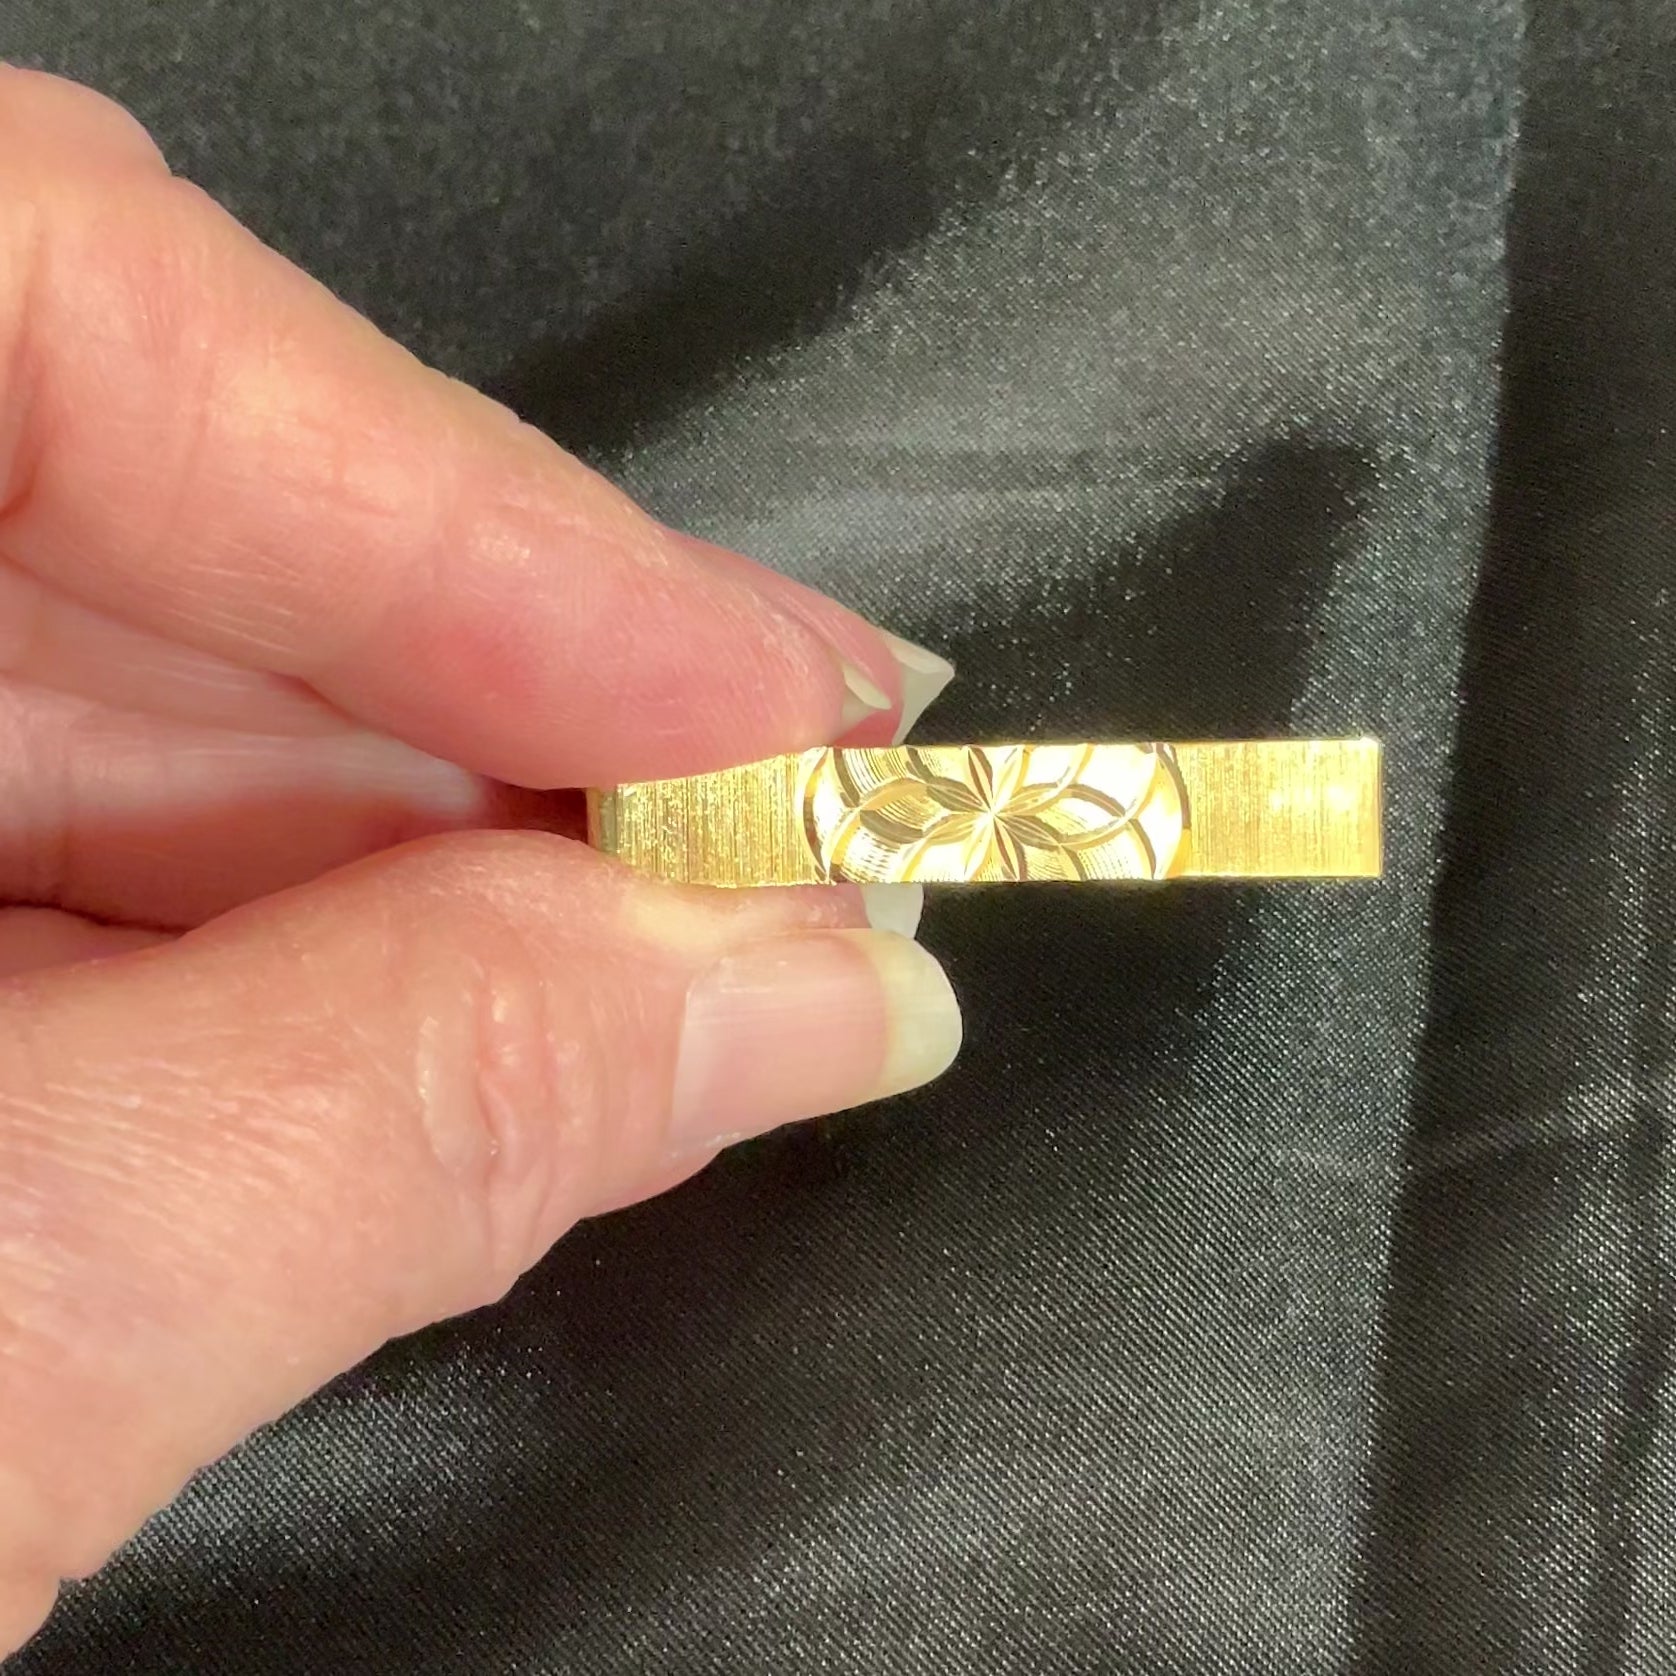 Diamond Cut Etched Vintage Tie Clip Clasp video showing how the design sparkles and flashes in the light.